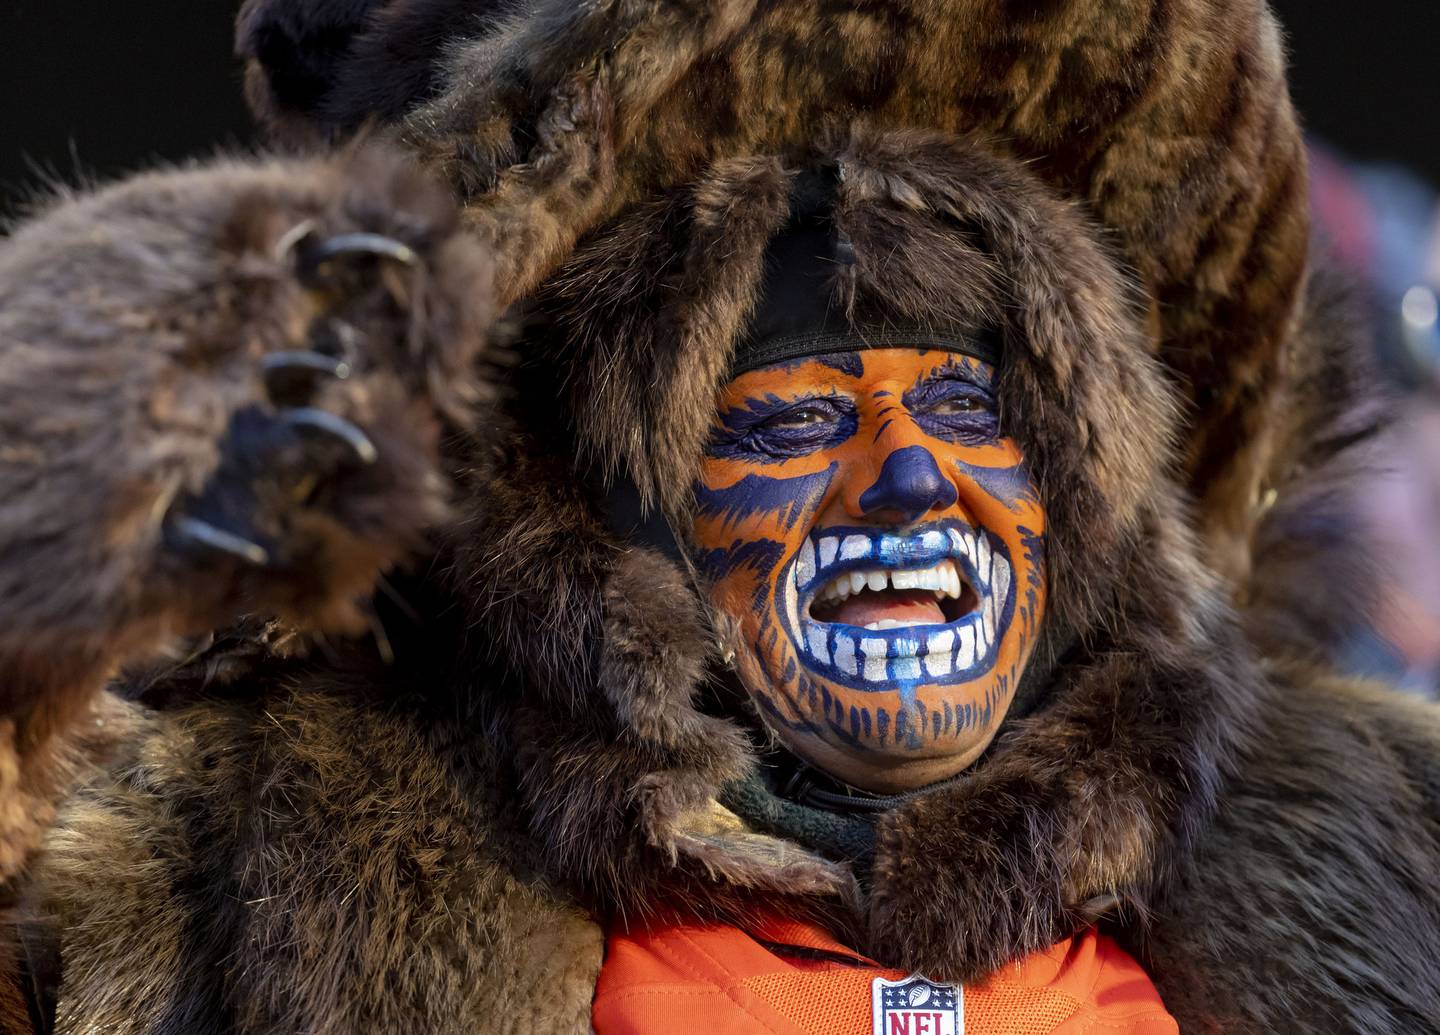 A Bears fan enjoys a game at Soldier Field on Dec. 18, 2022.